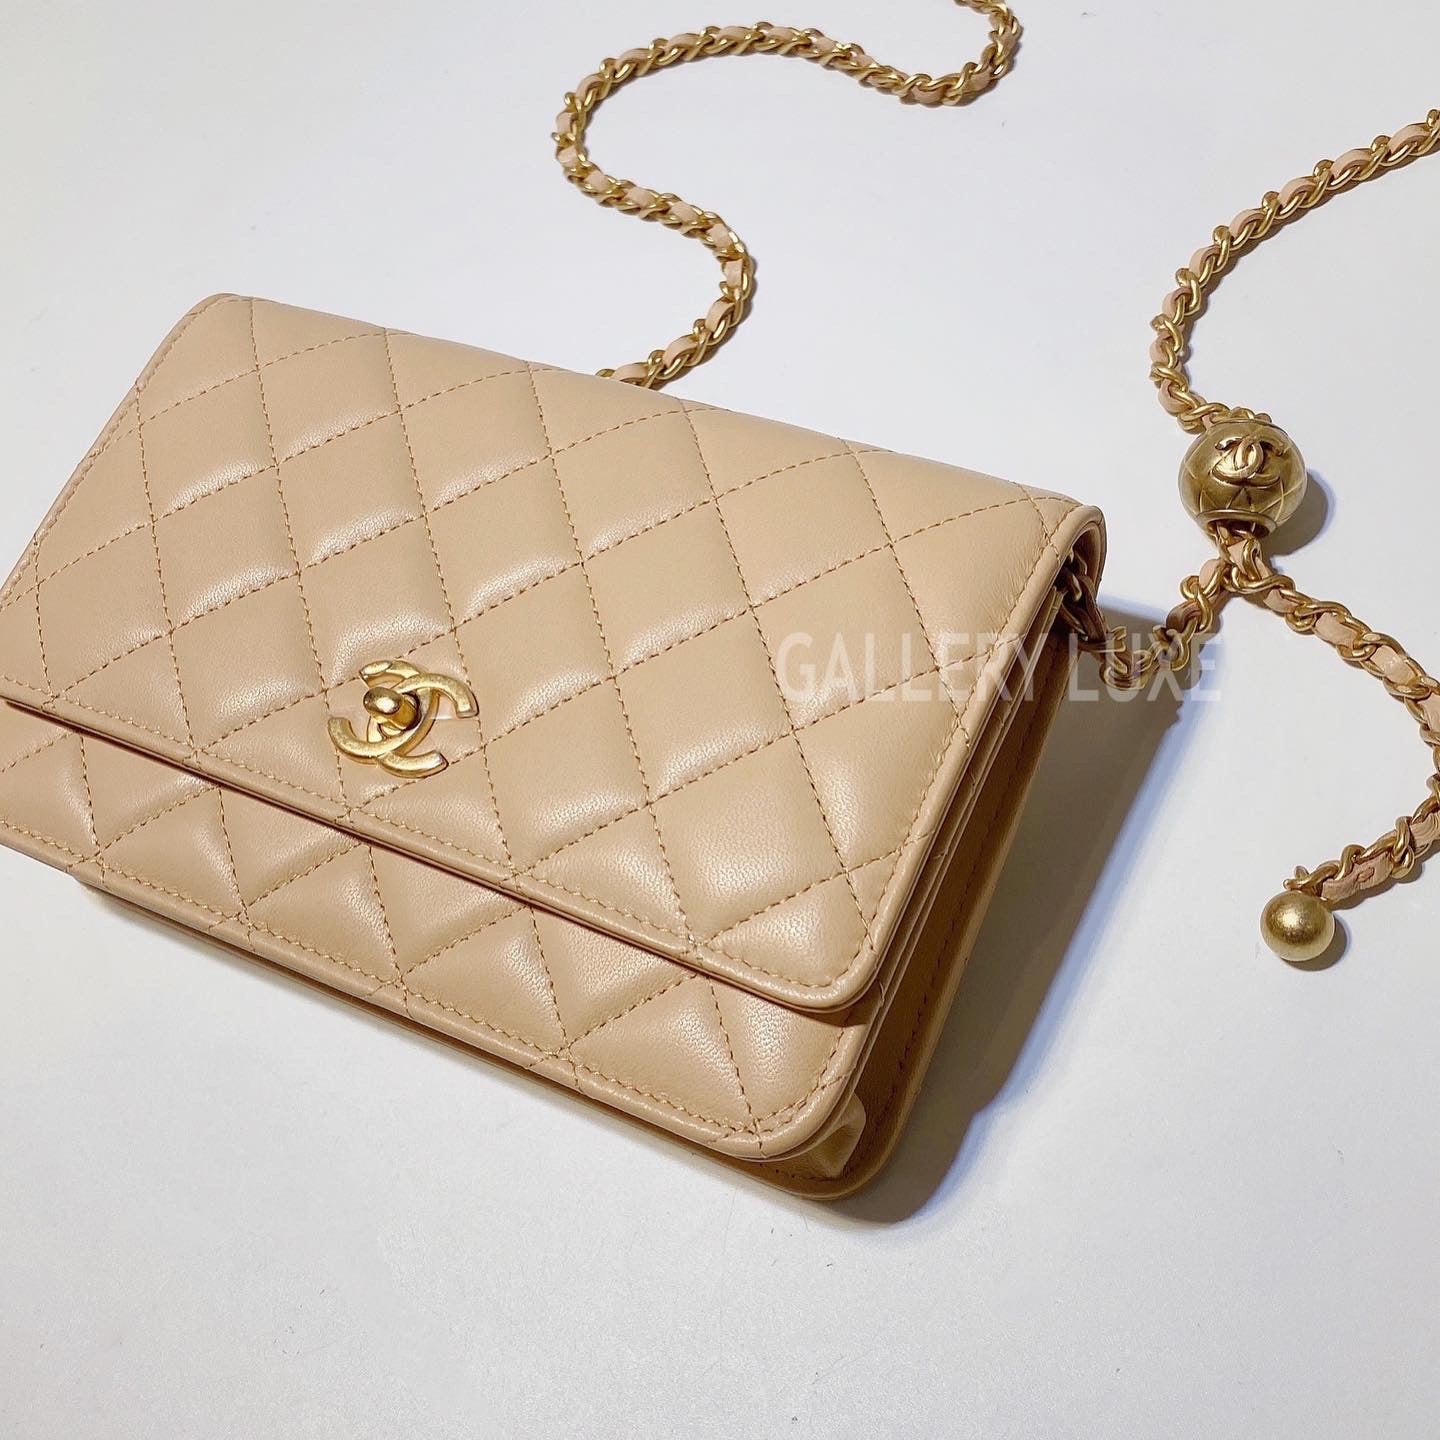 Classic wallet on chain  Patent calfskin  goldtone metal yellow   Fashion  CHANEL